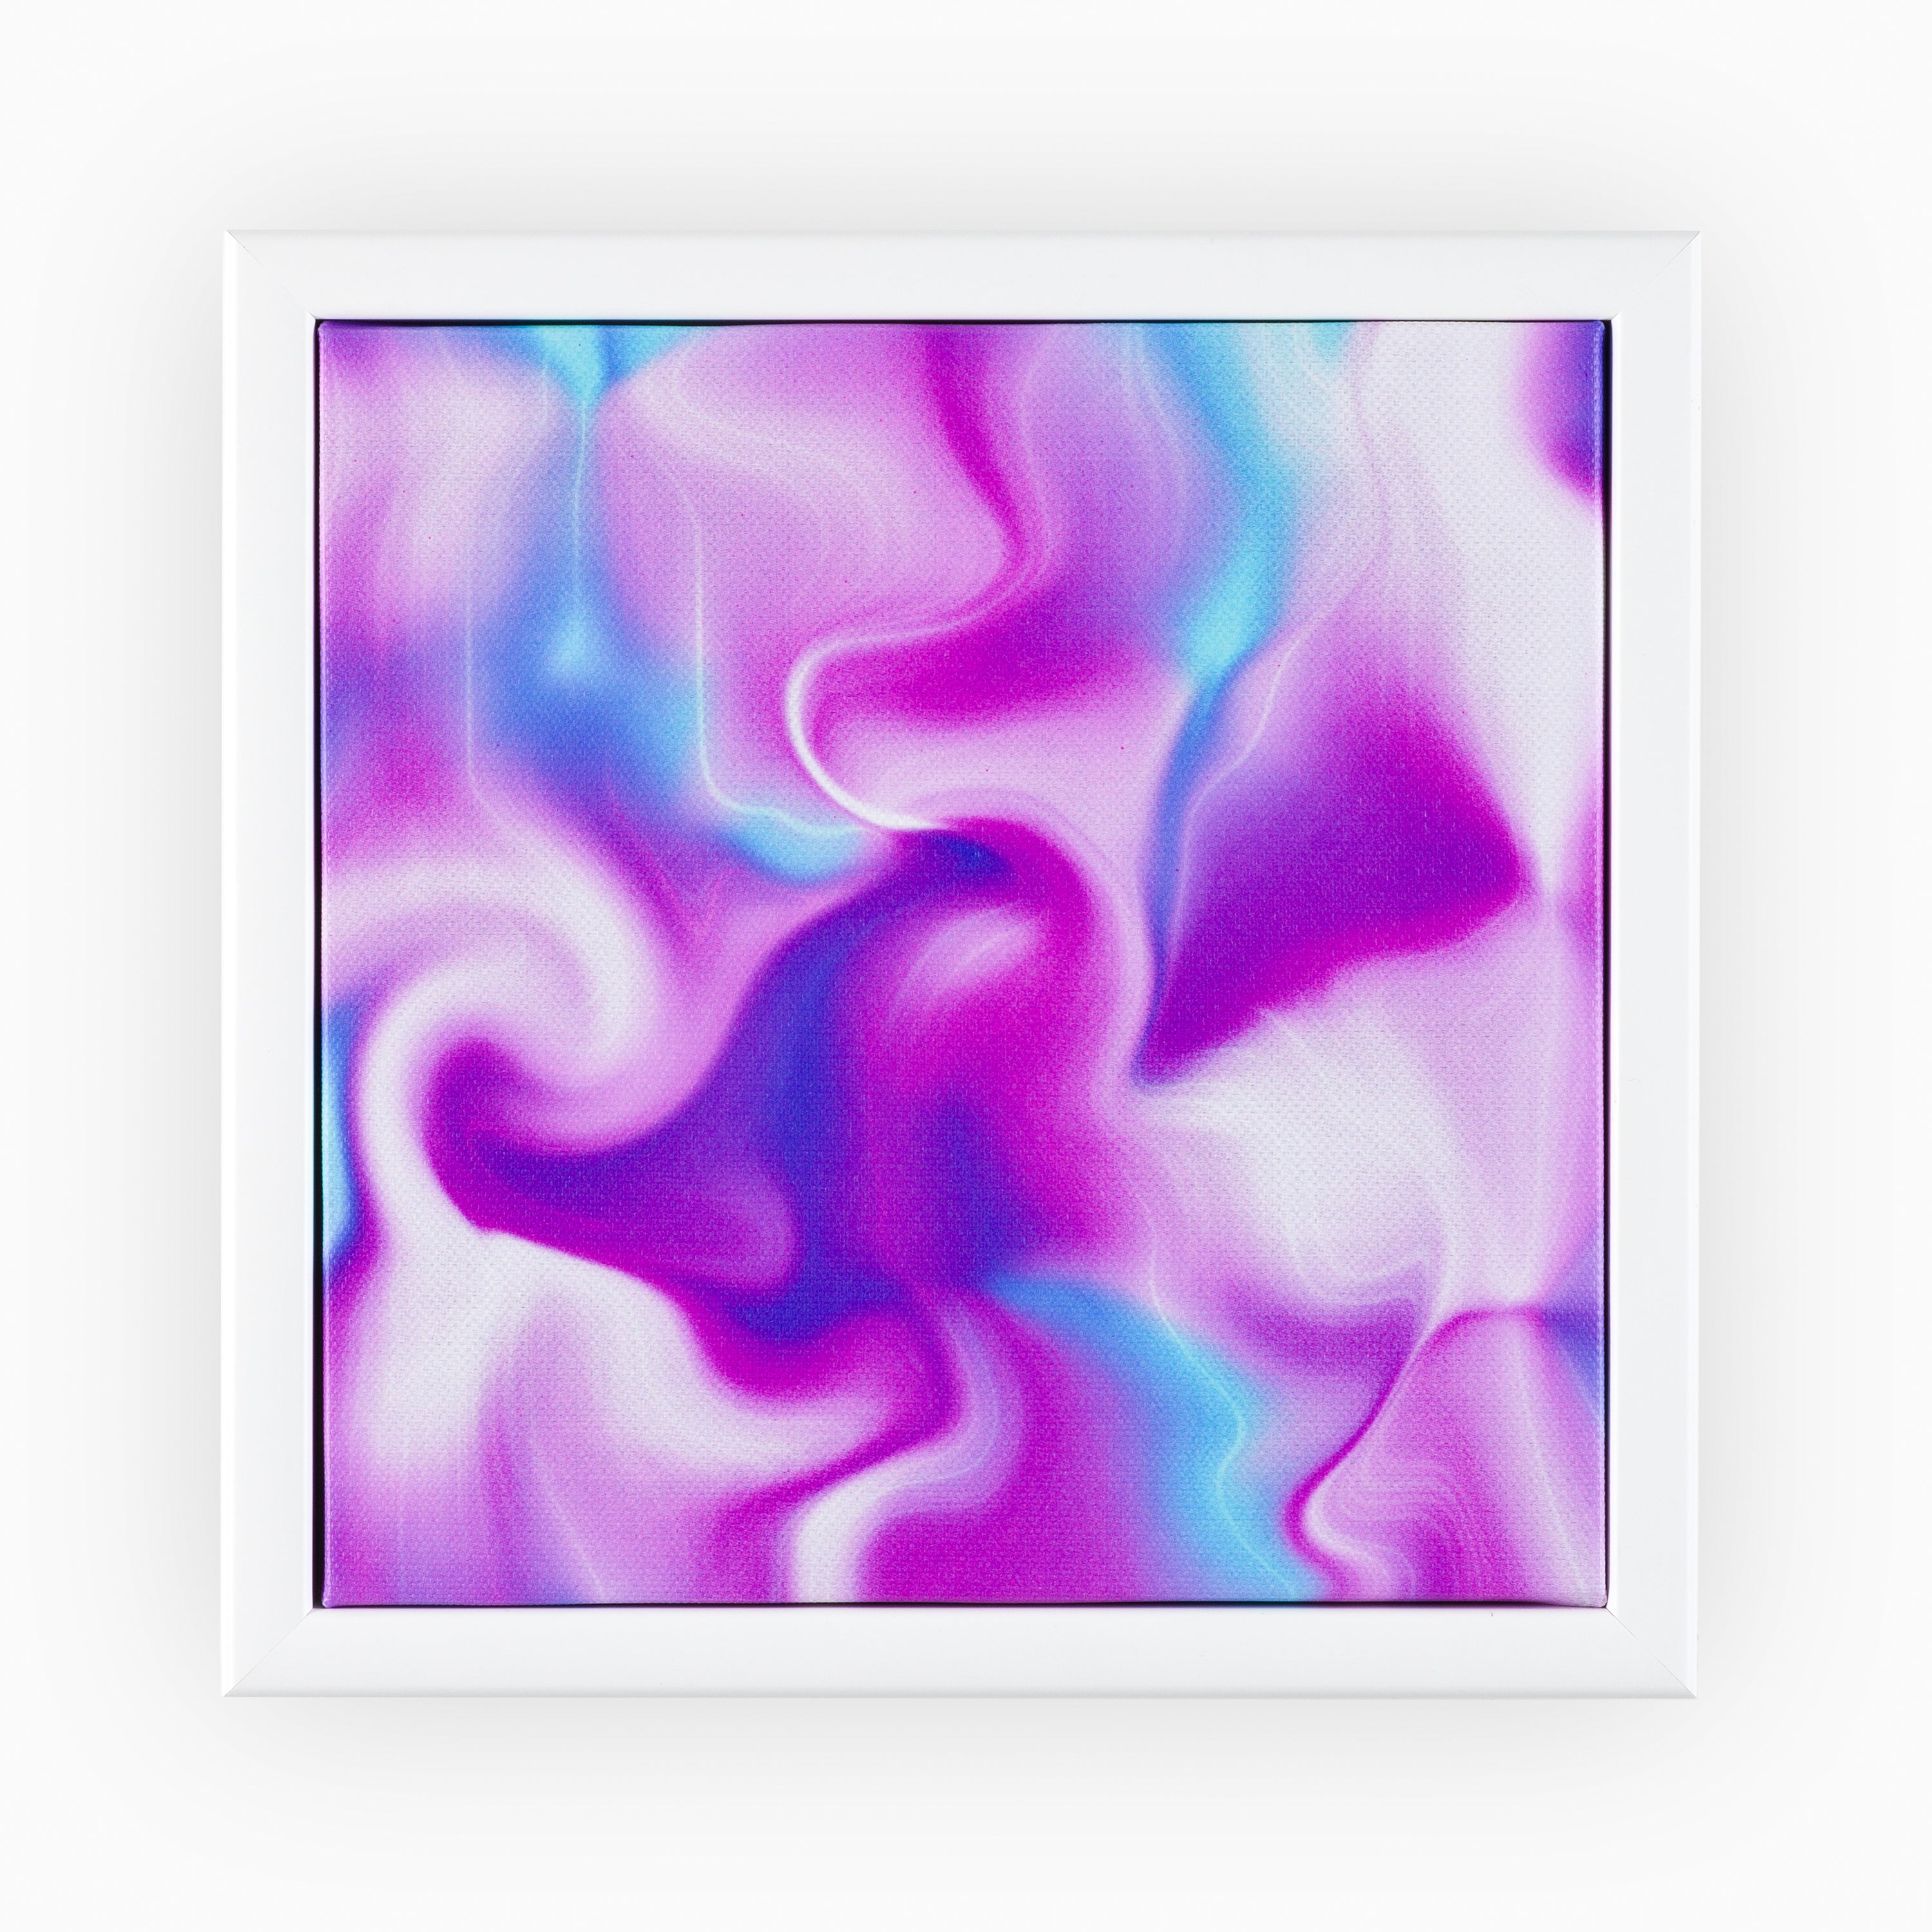 High-quality digital print on canvas, surrounded by a pristine white frame, featuring a vibrant, fluid mix of pink and lilac with subtle blue undertones, evoking the artistry of watercolour techniques.